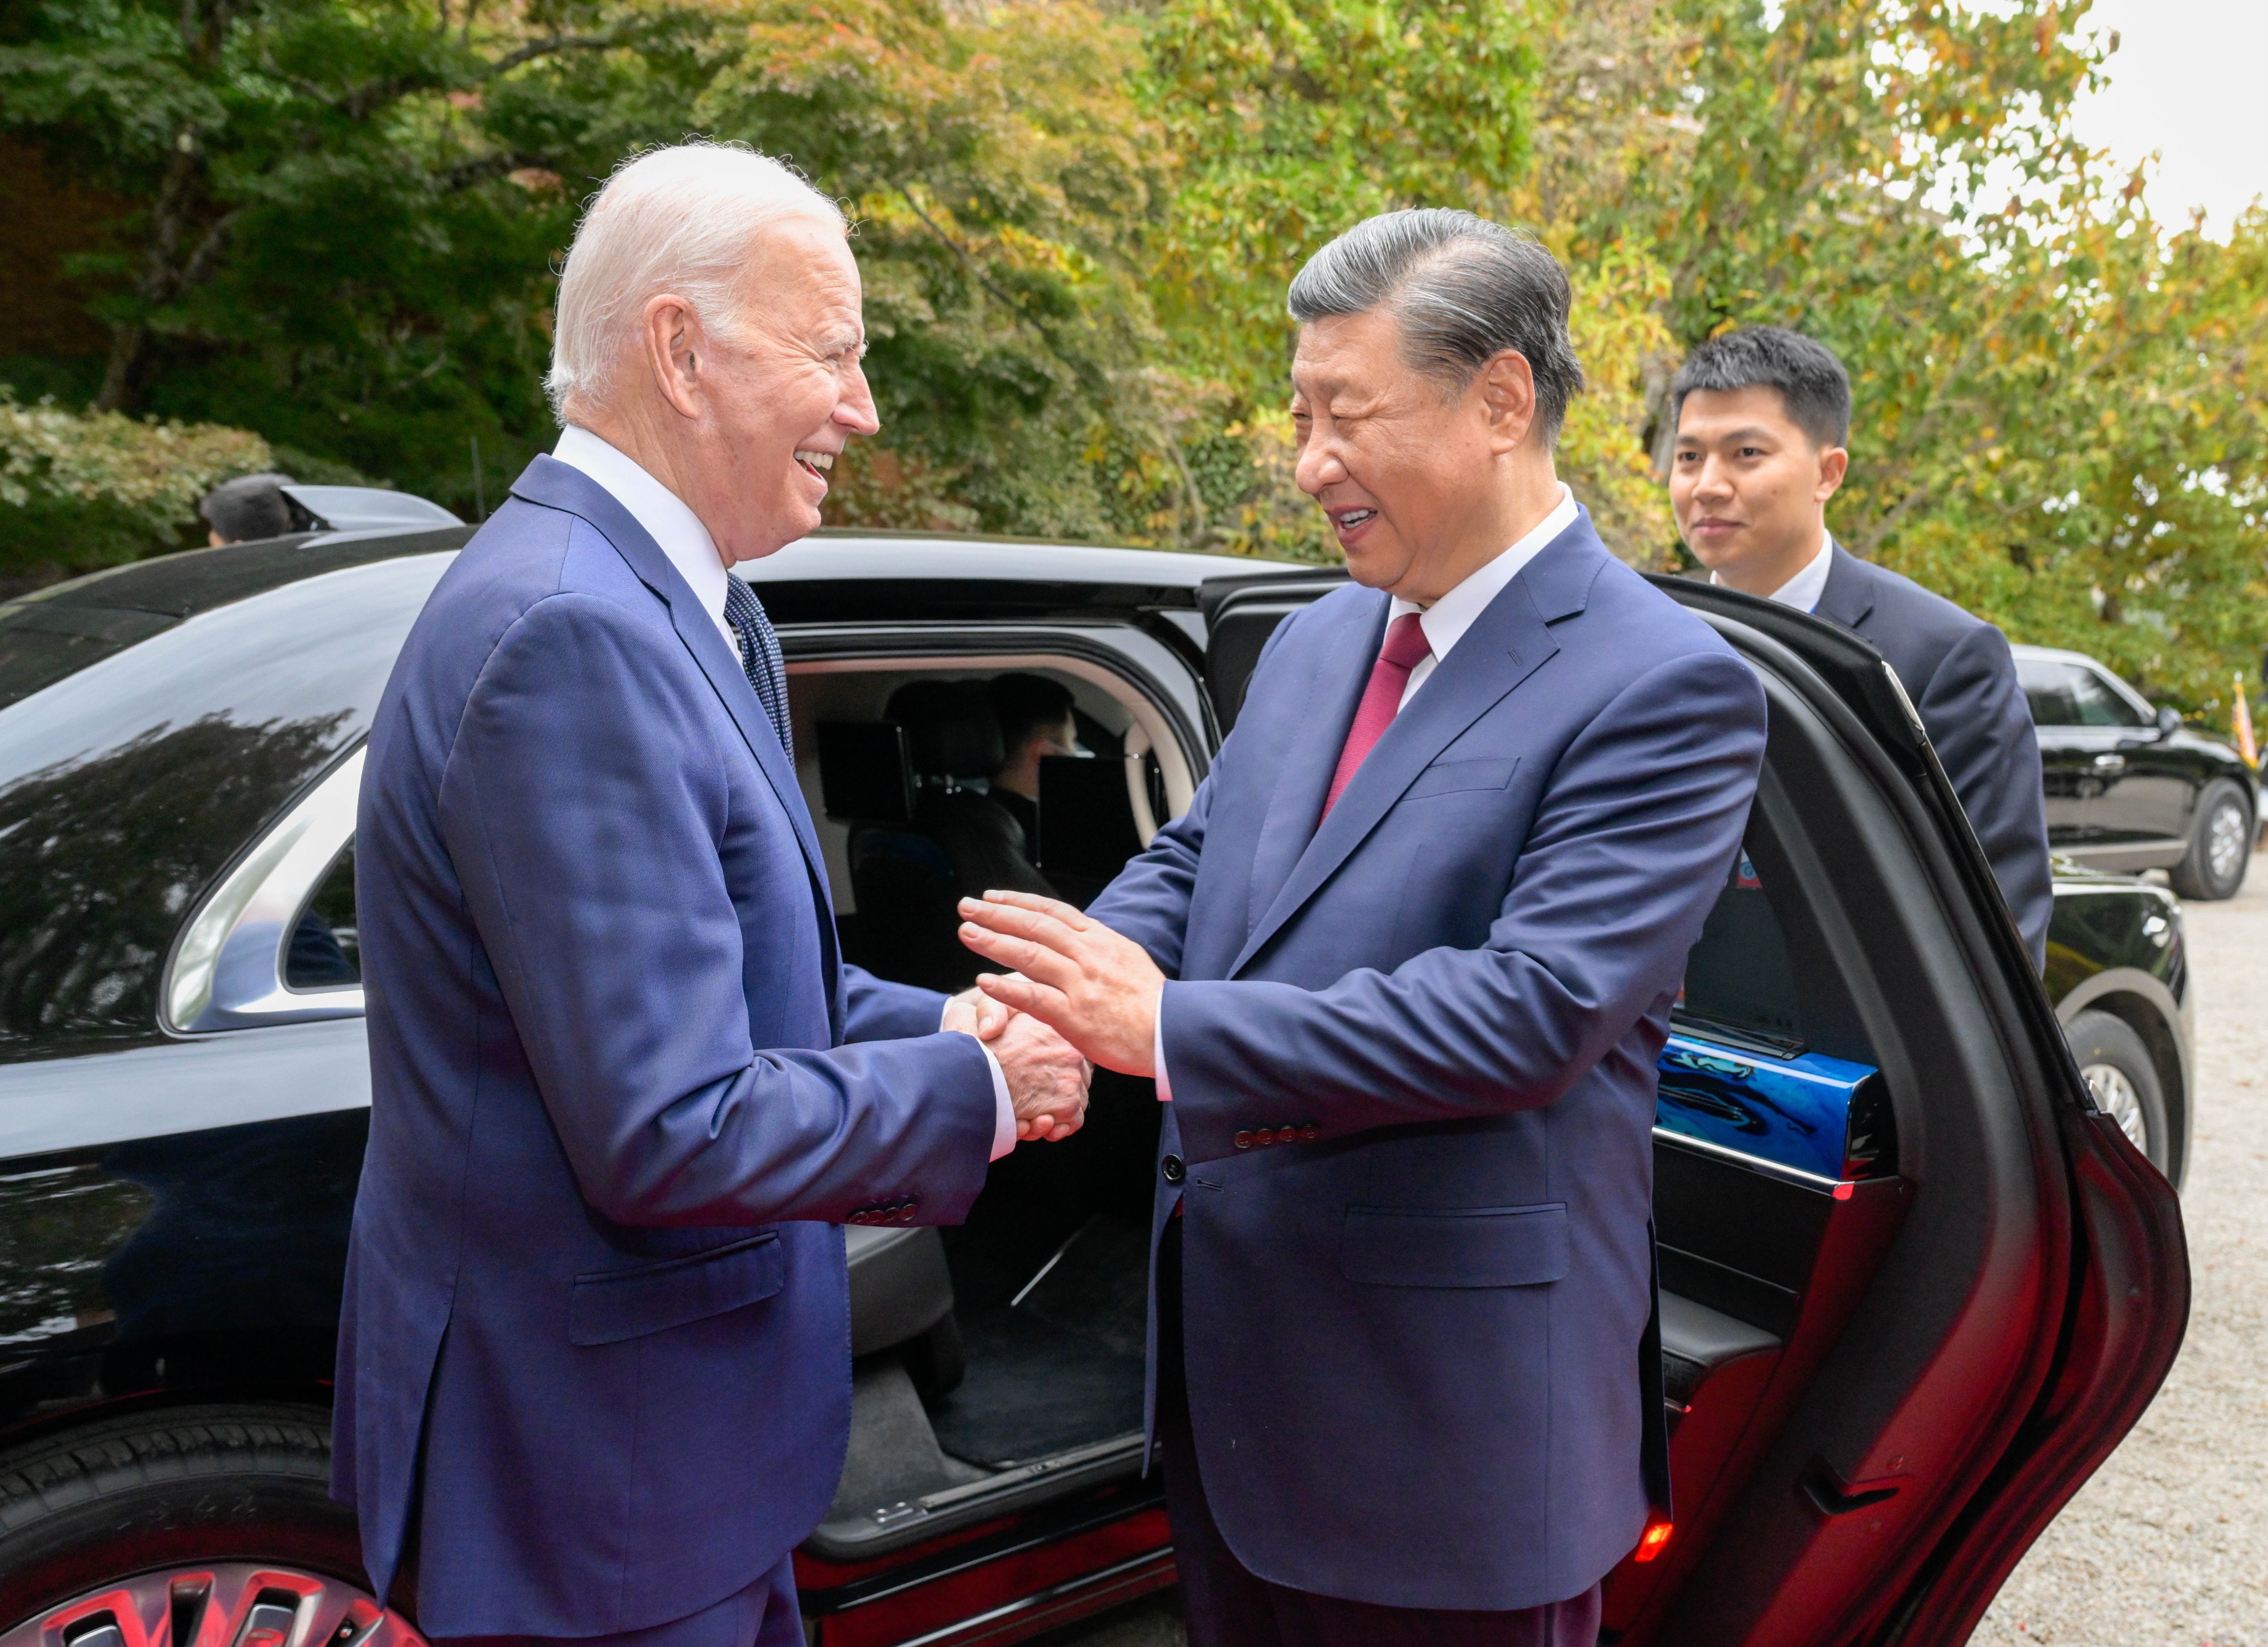 US President Joe Biden  sees off Chinese counterpart Xi Jinping after their talks at the Filoli estate outside San Francisco, California. Photo: EPA-EFE